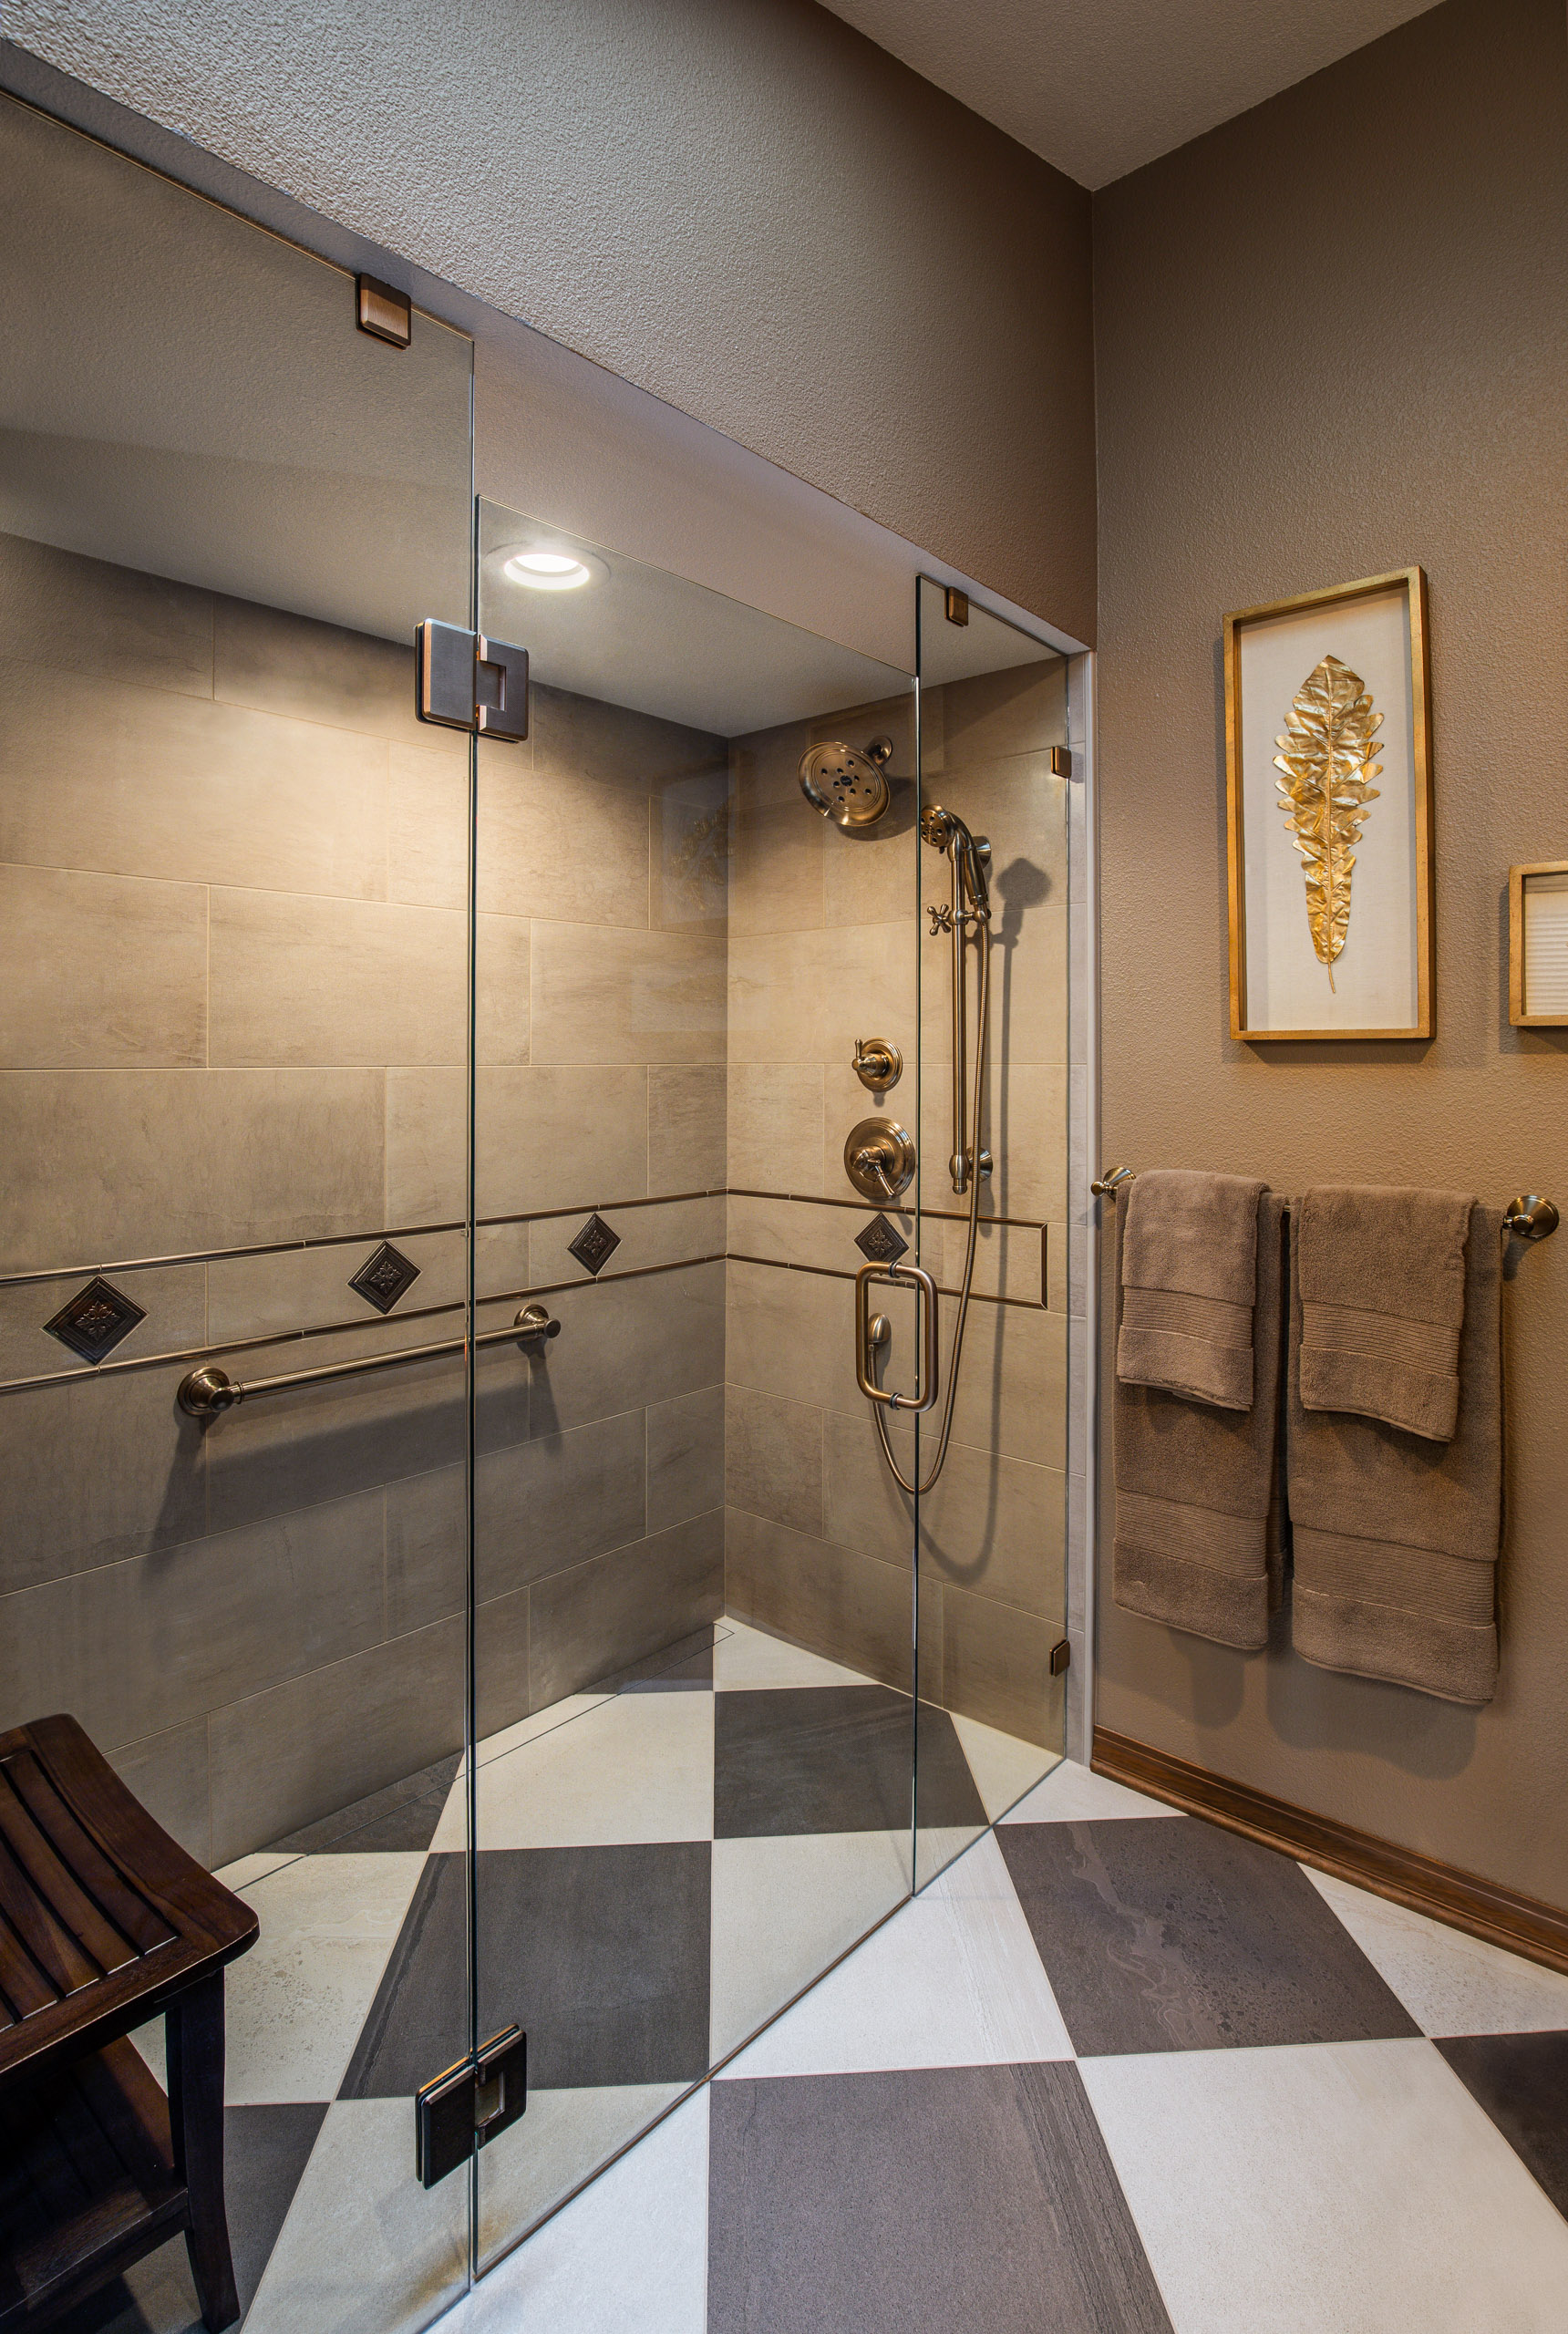 Bathroom With Stylish Walk-In Shower - C&R Remodeling